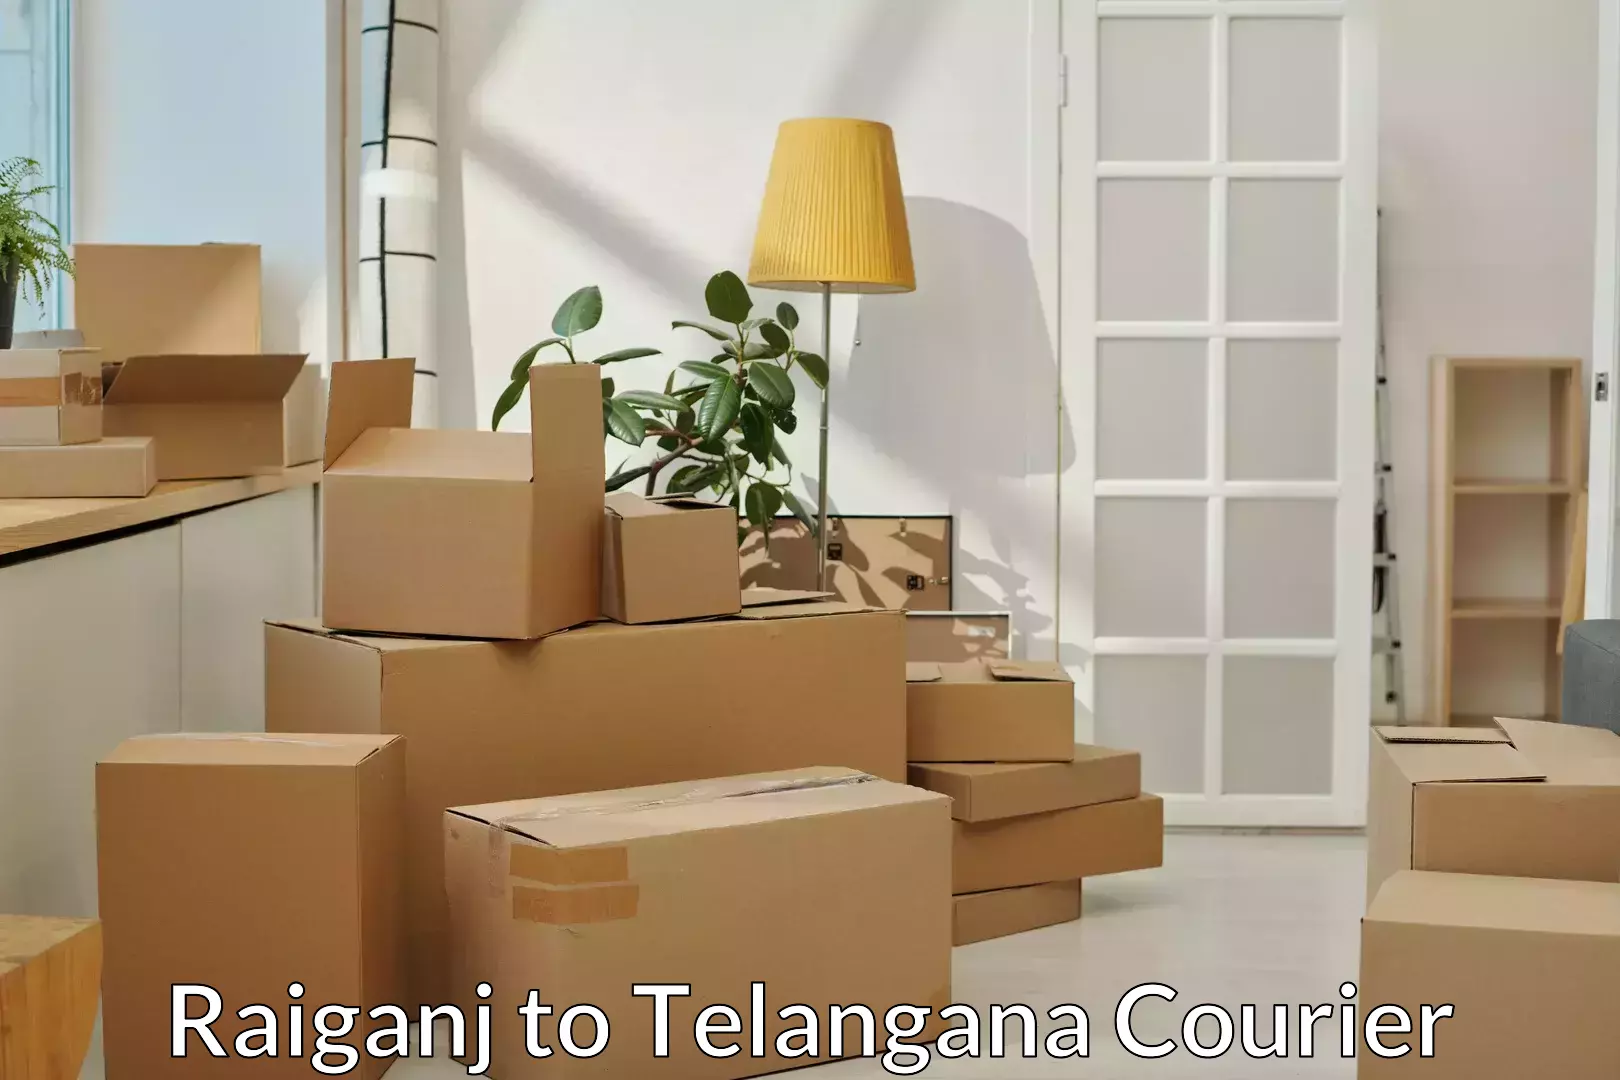 Furniture transport specialists Raiganj to Sathupally